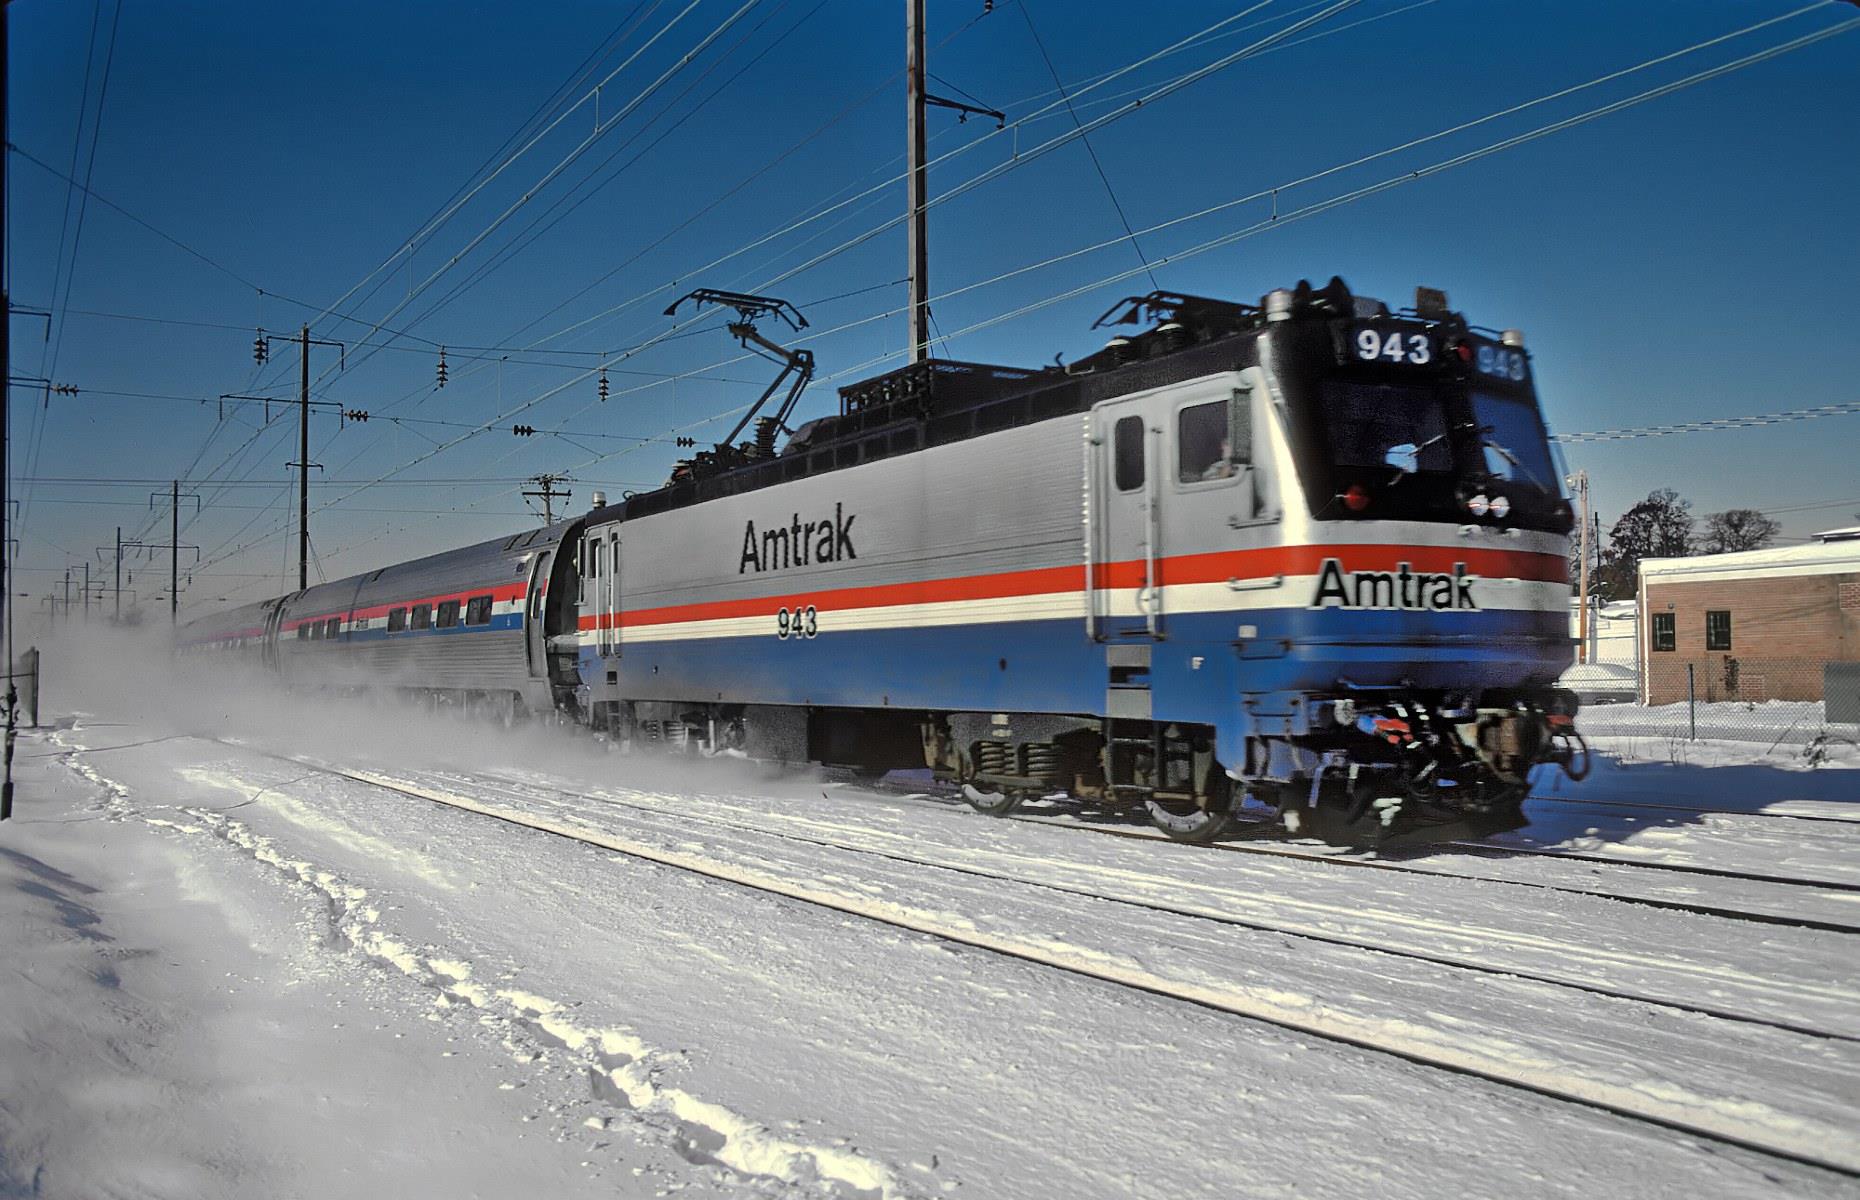 <p>Amtrak’s efforts to rejuvenate rolling stock and stations did not significantly boost passenger numbers, which remained relatively stable between 1980 and 2000. It had more success in reviving freight traffic, however. Restrictive regulations were binned, allowing operators to concentrate on profitable lines and alter timetables to make networks more efficient. New trains like the electric-powered AEM-7 (pictured here in 1987) became workhorses of the Amtrak fleet. Now, rail carries 40% of America’s freight – more than any other form of transport.</p>